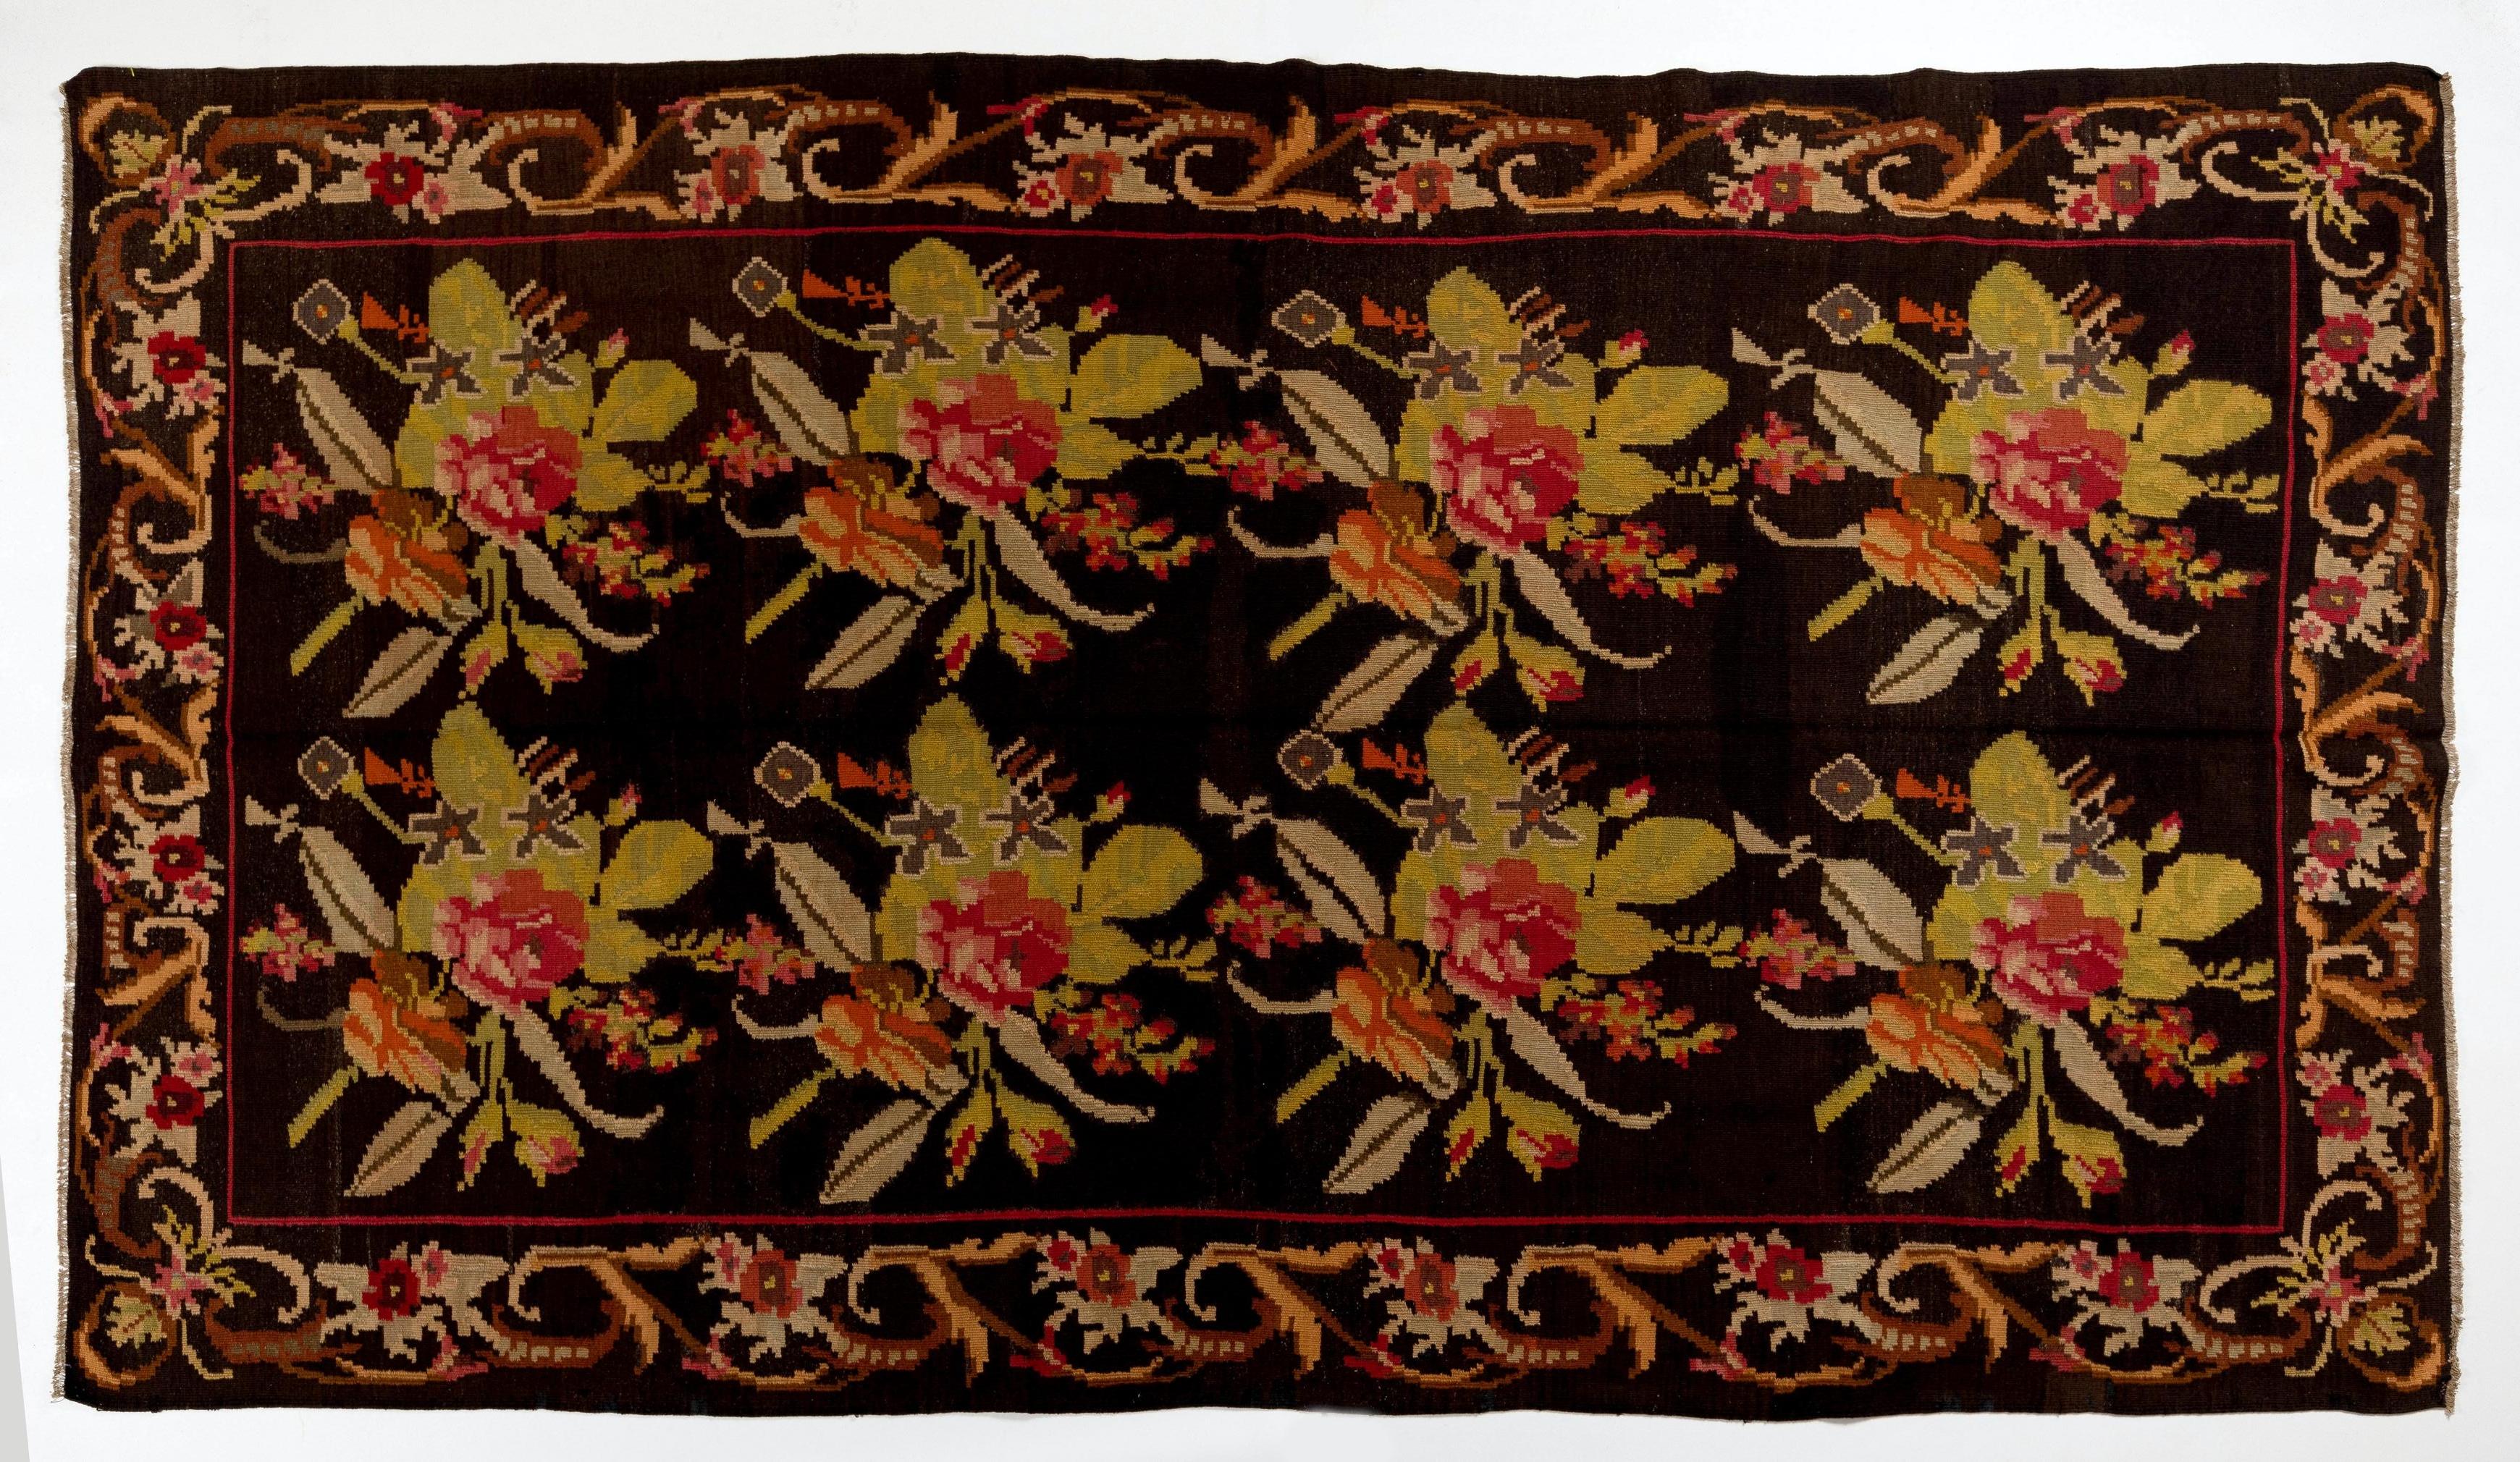 20th Century 6.7x11.8 Ft HandWoven Moldovan Kilim with Floral Design. Vintage Bessarabian Rug For Sale